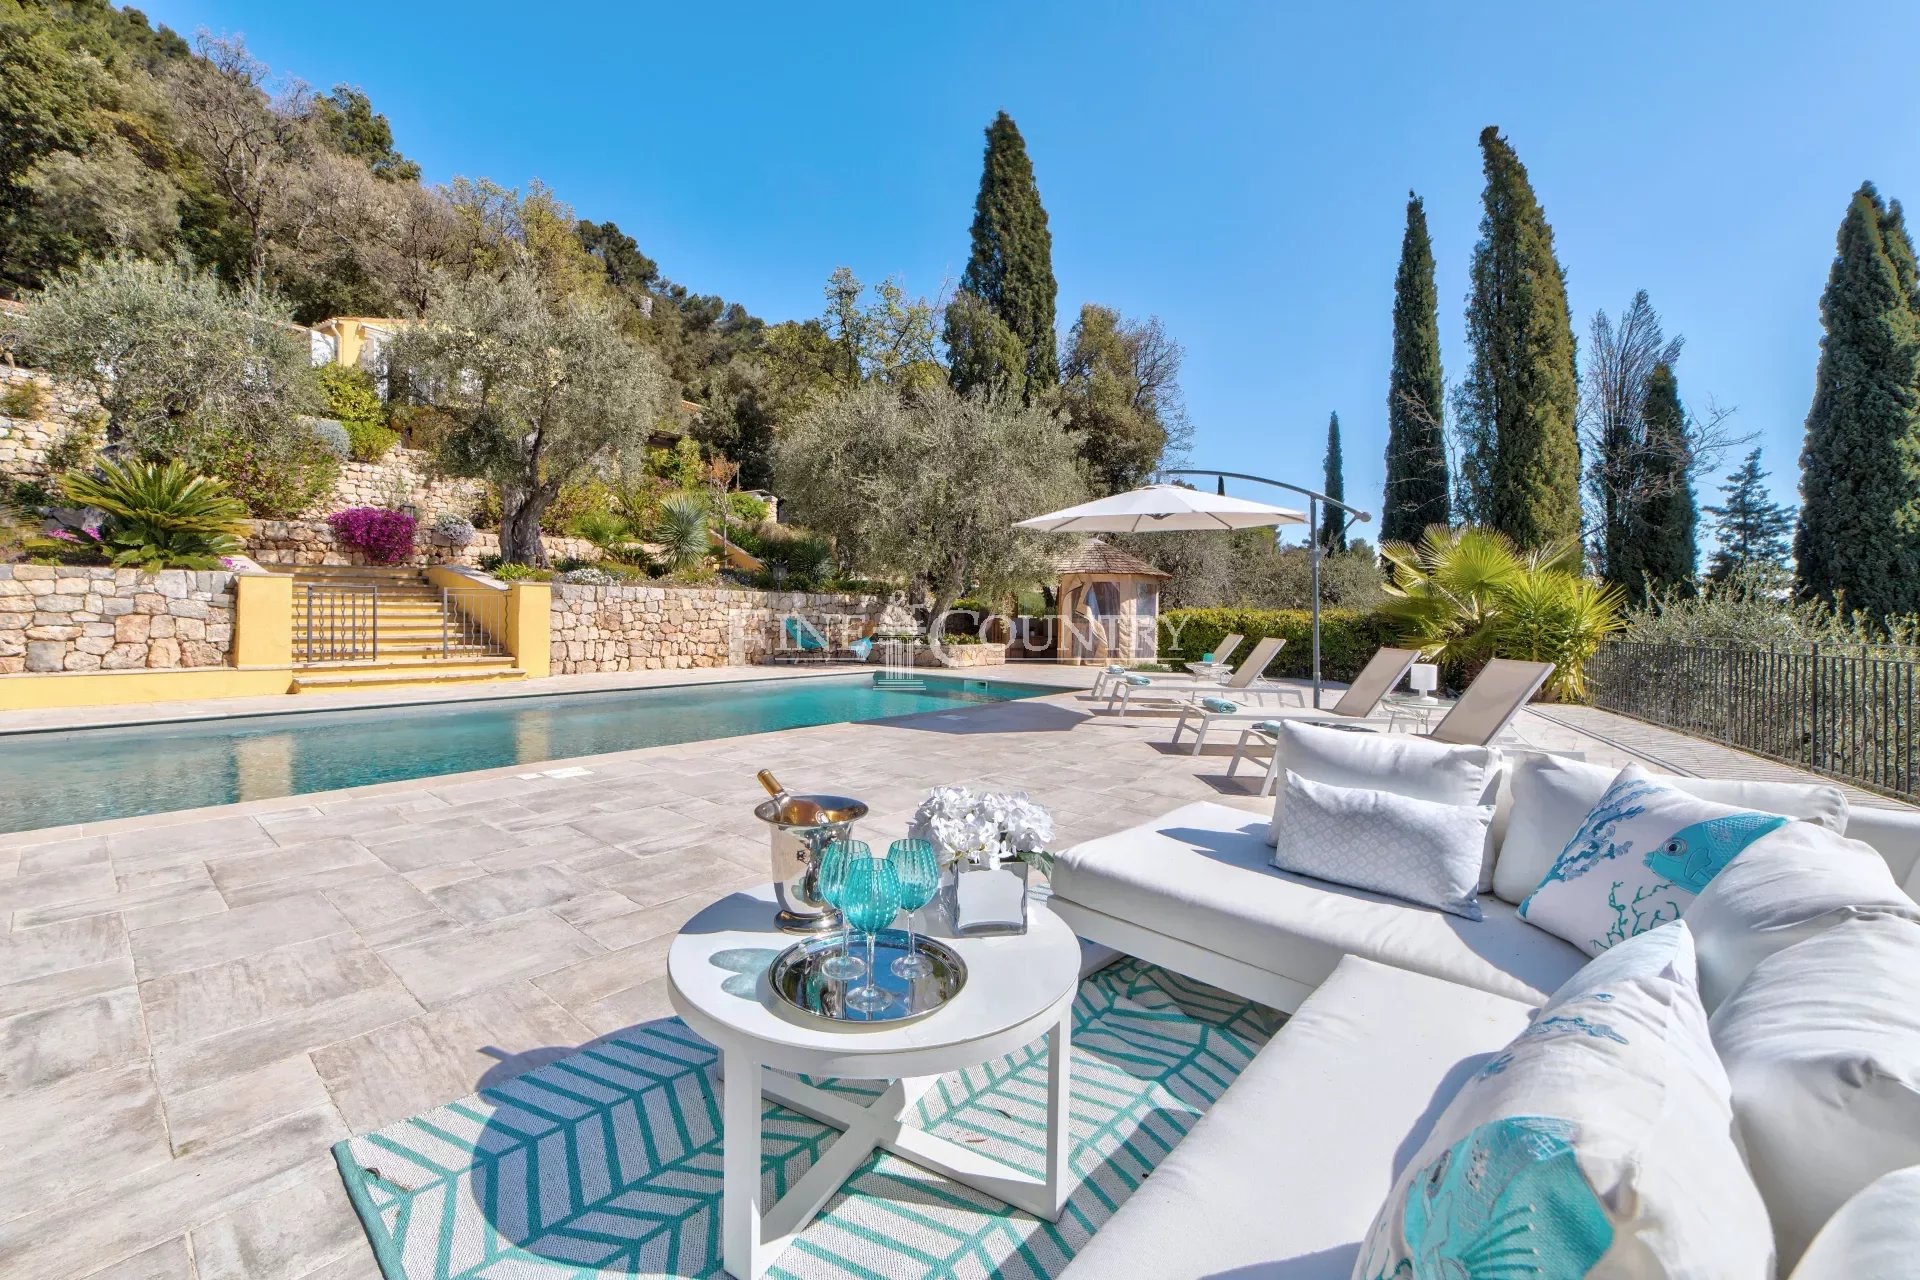 Photo of Villa for sale in Le Tignet, in the hills above Cannes